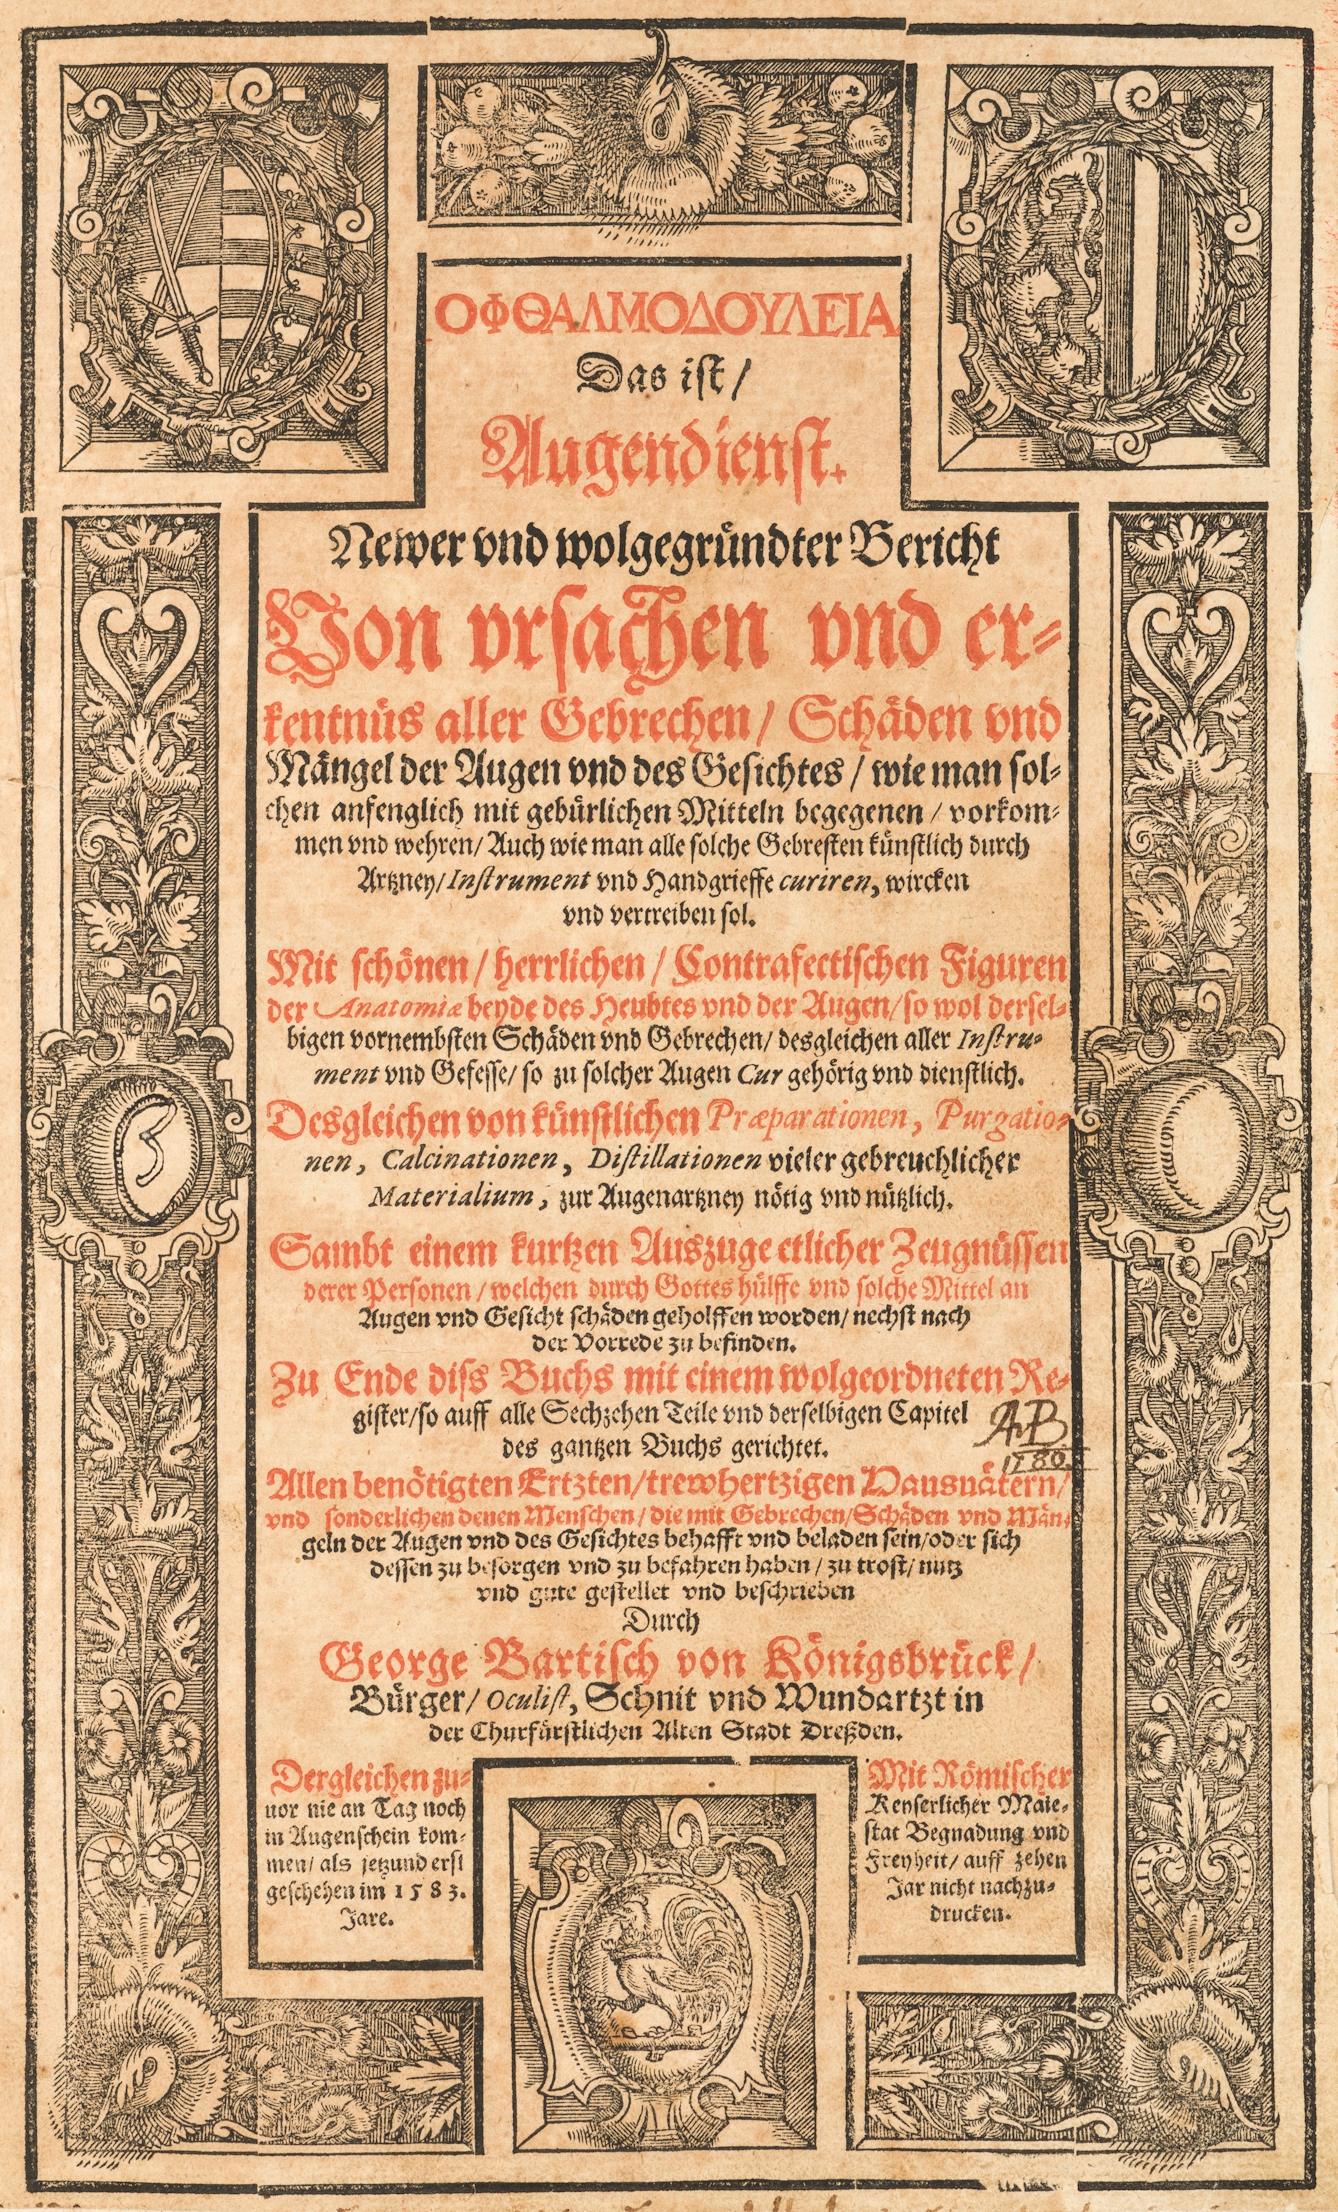 Photograph of the title page of a 16th century book with ornate engravings and red and black text. The text is written in German.